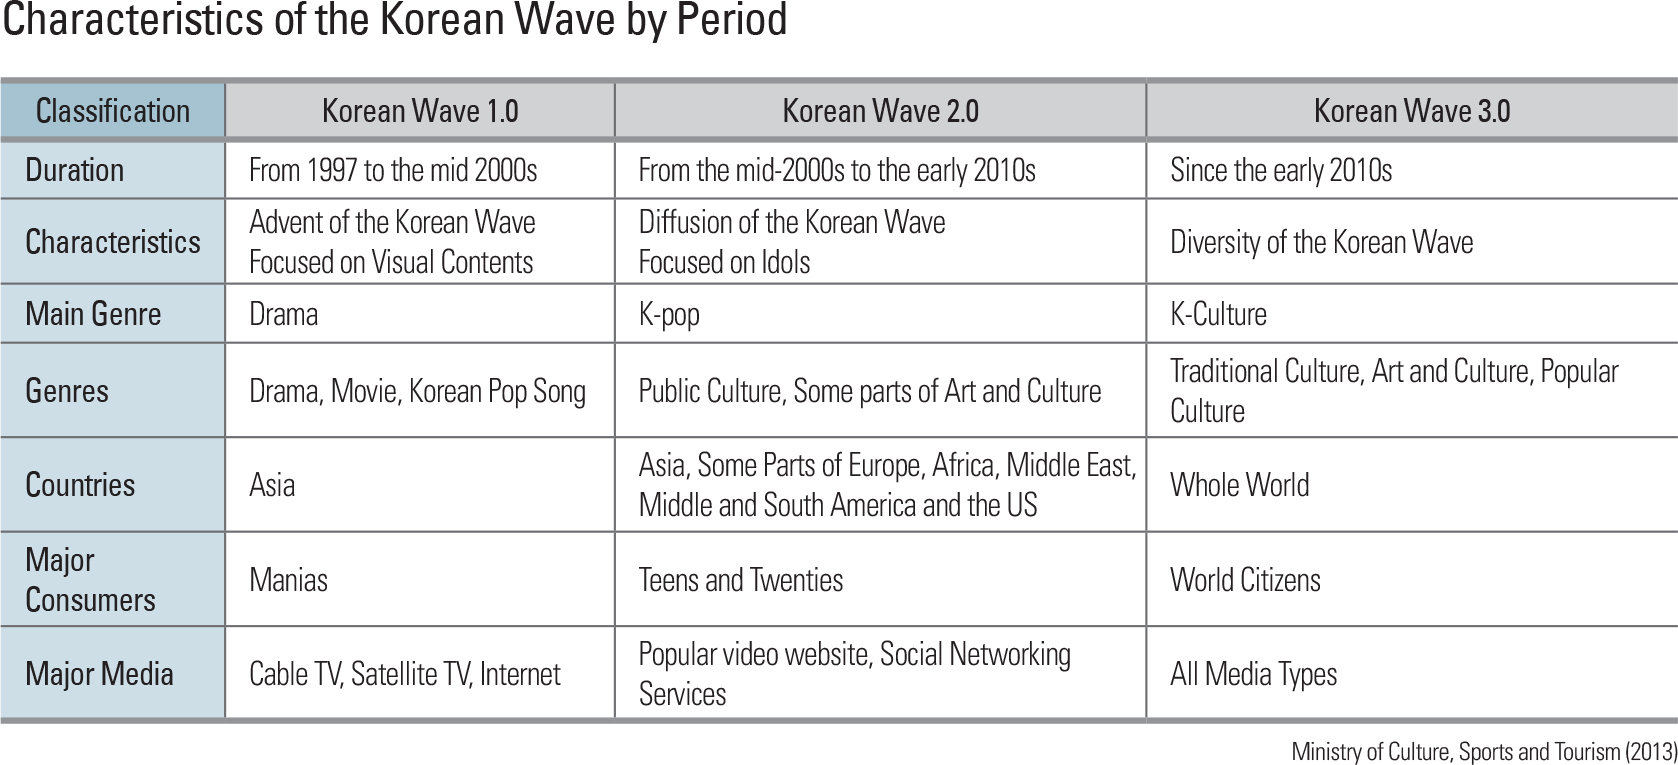 Characteristics of the Korean Wave by Period